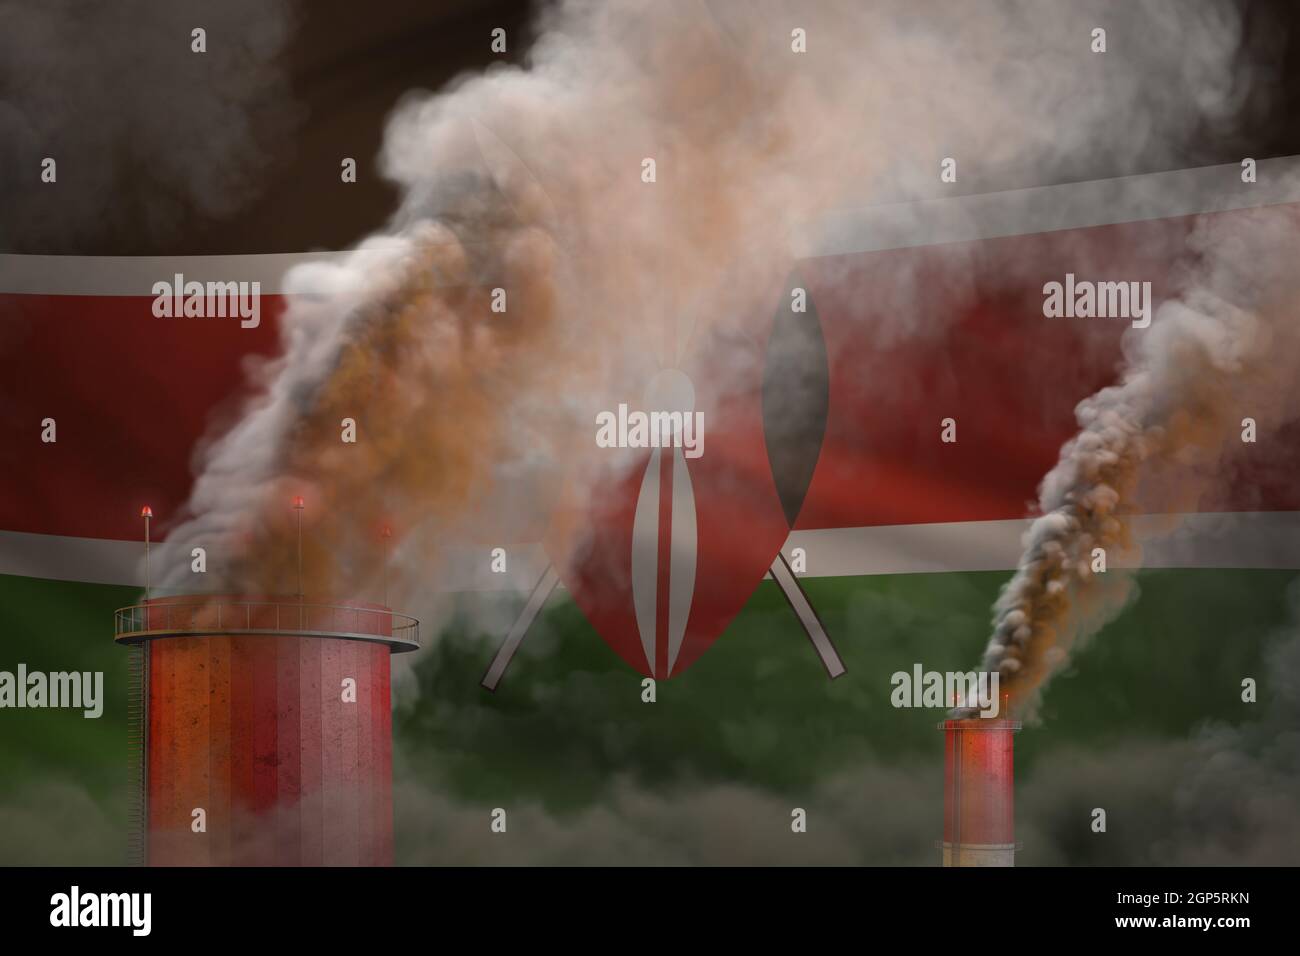 Global warming concept - dense smoke from plant chimneys on Kenya flag background with space for your logo - industrial 3D illustration Stock Photo